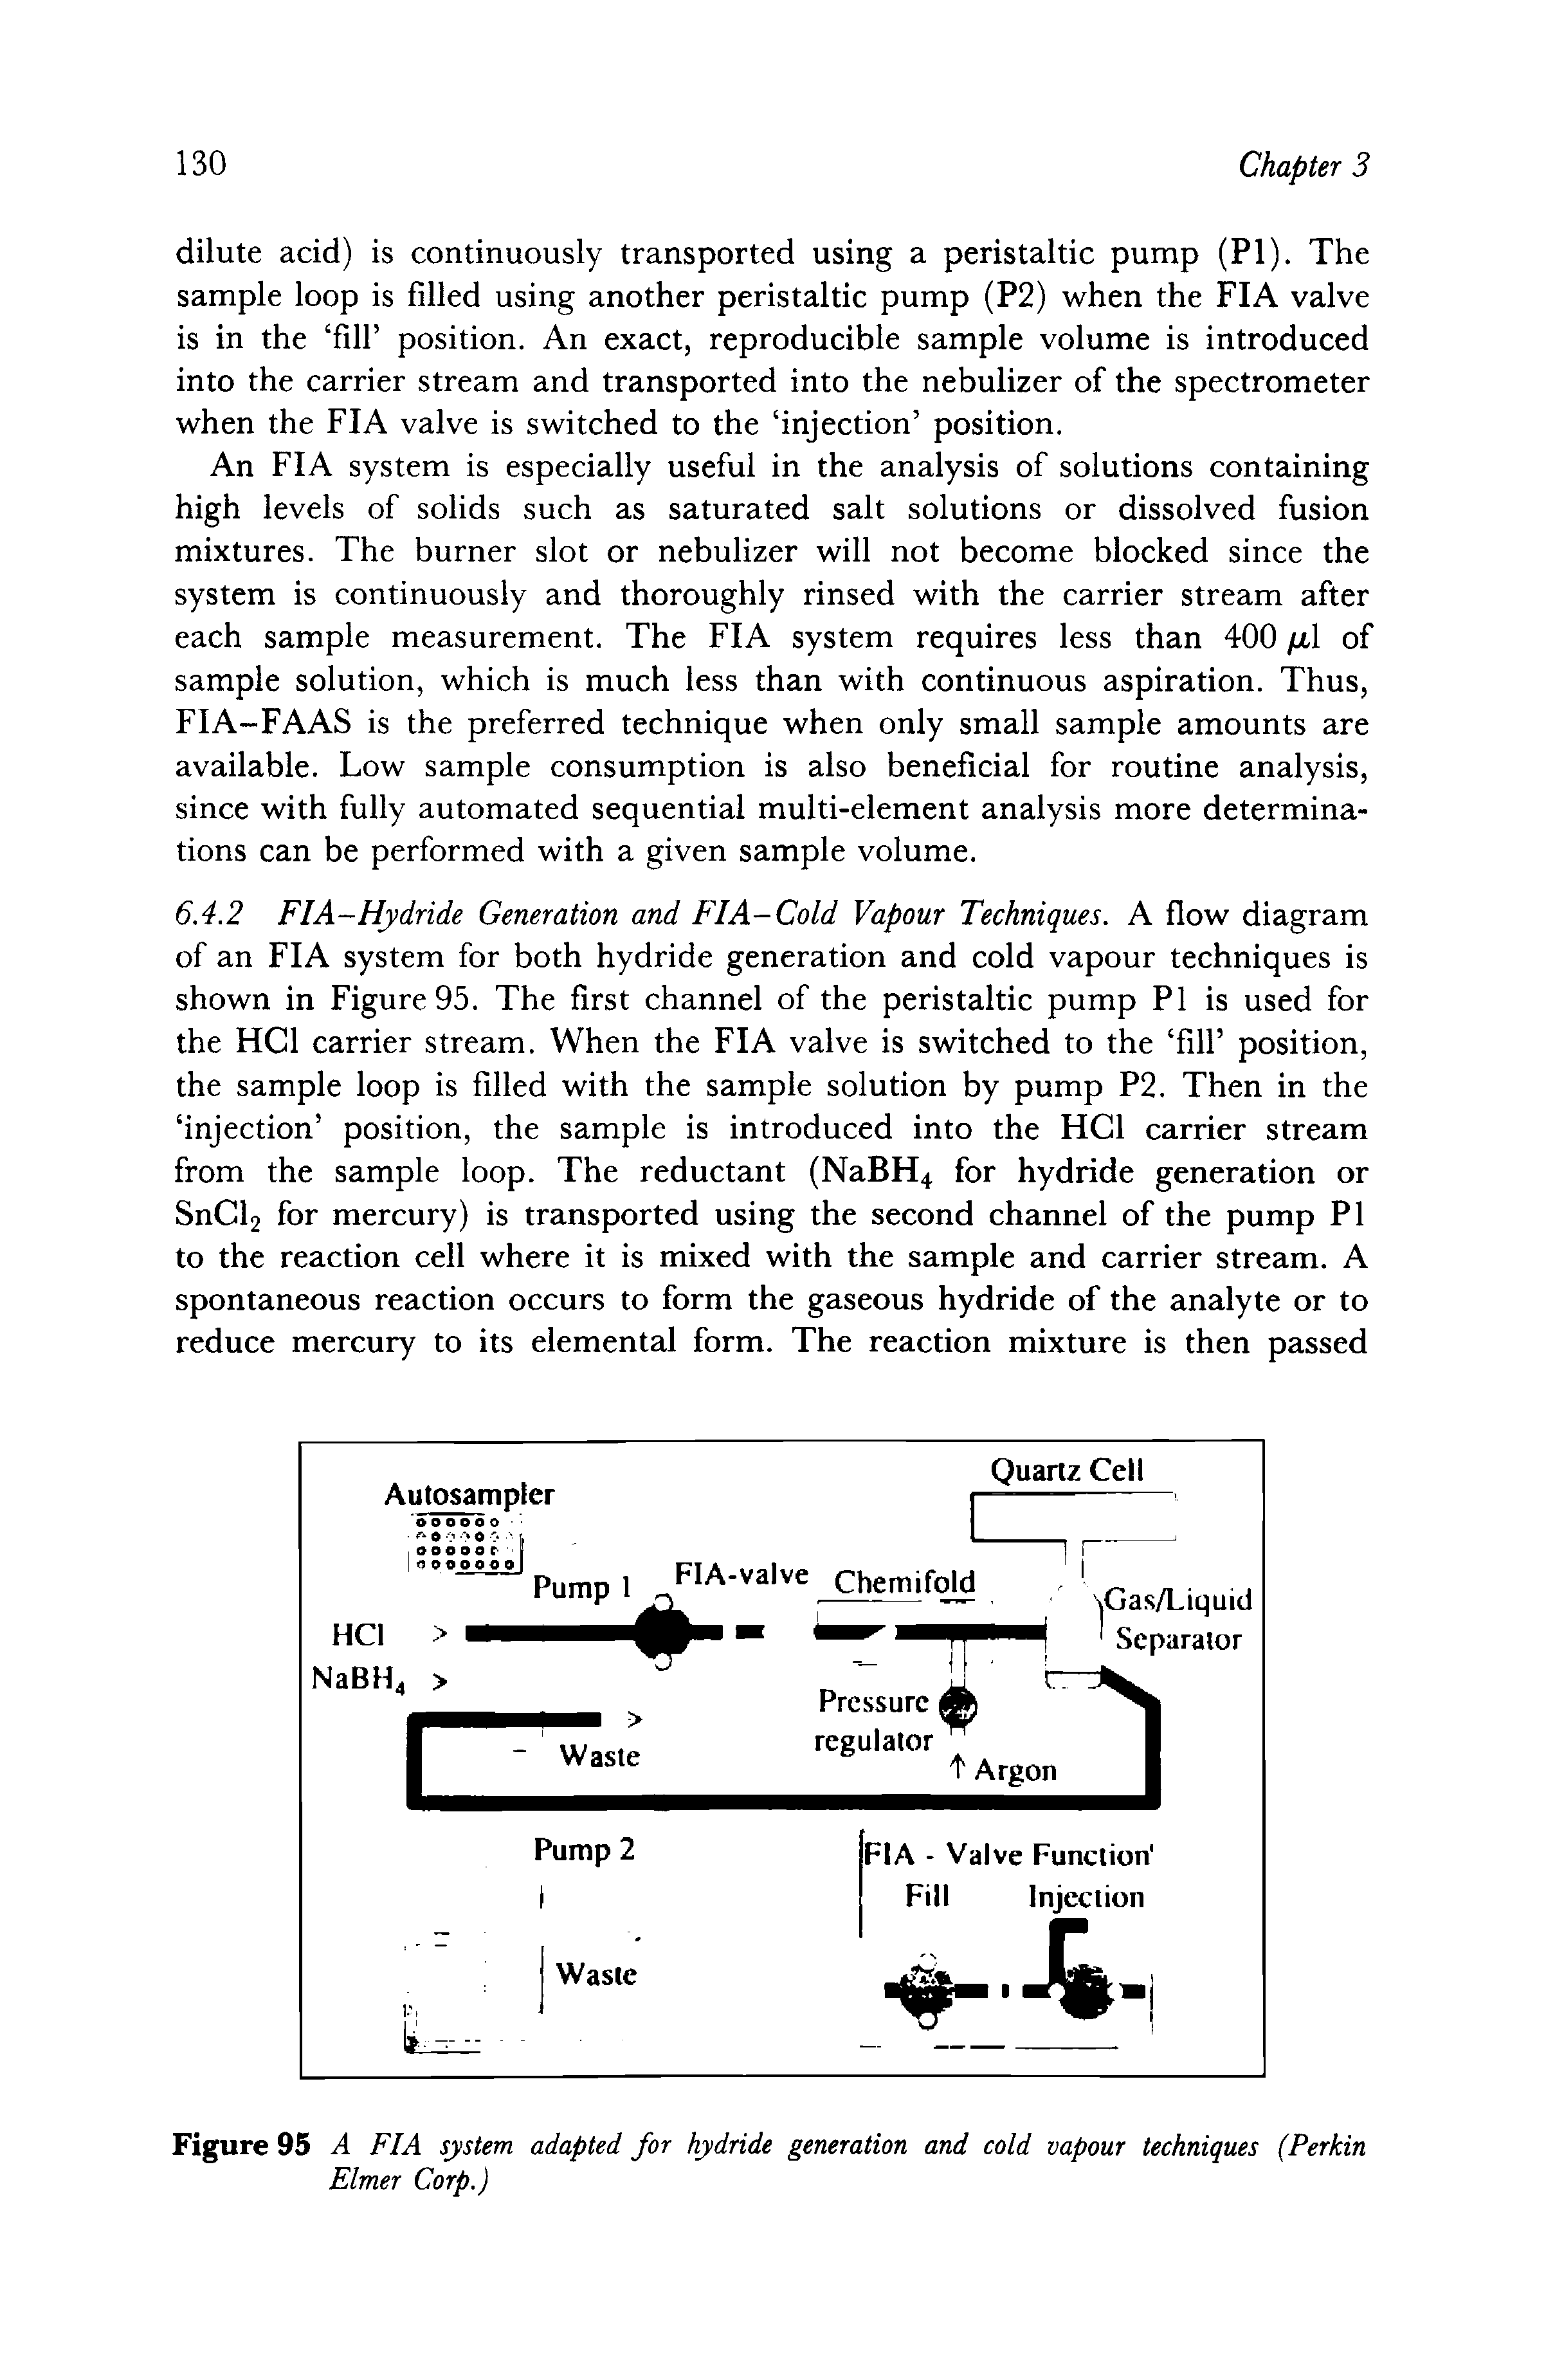 Figure 95 A FIA system adapted for hydride generation and cold vapour techniques (Perkin Elmer Corp.)...